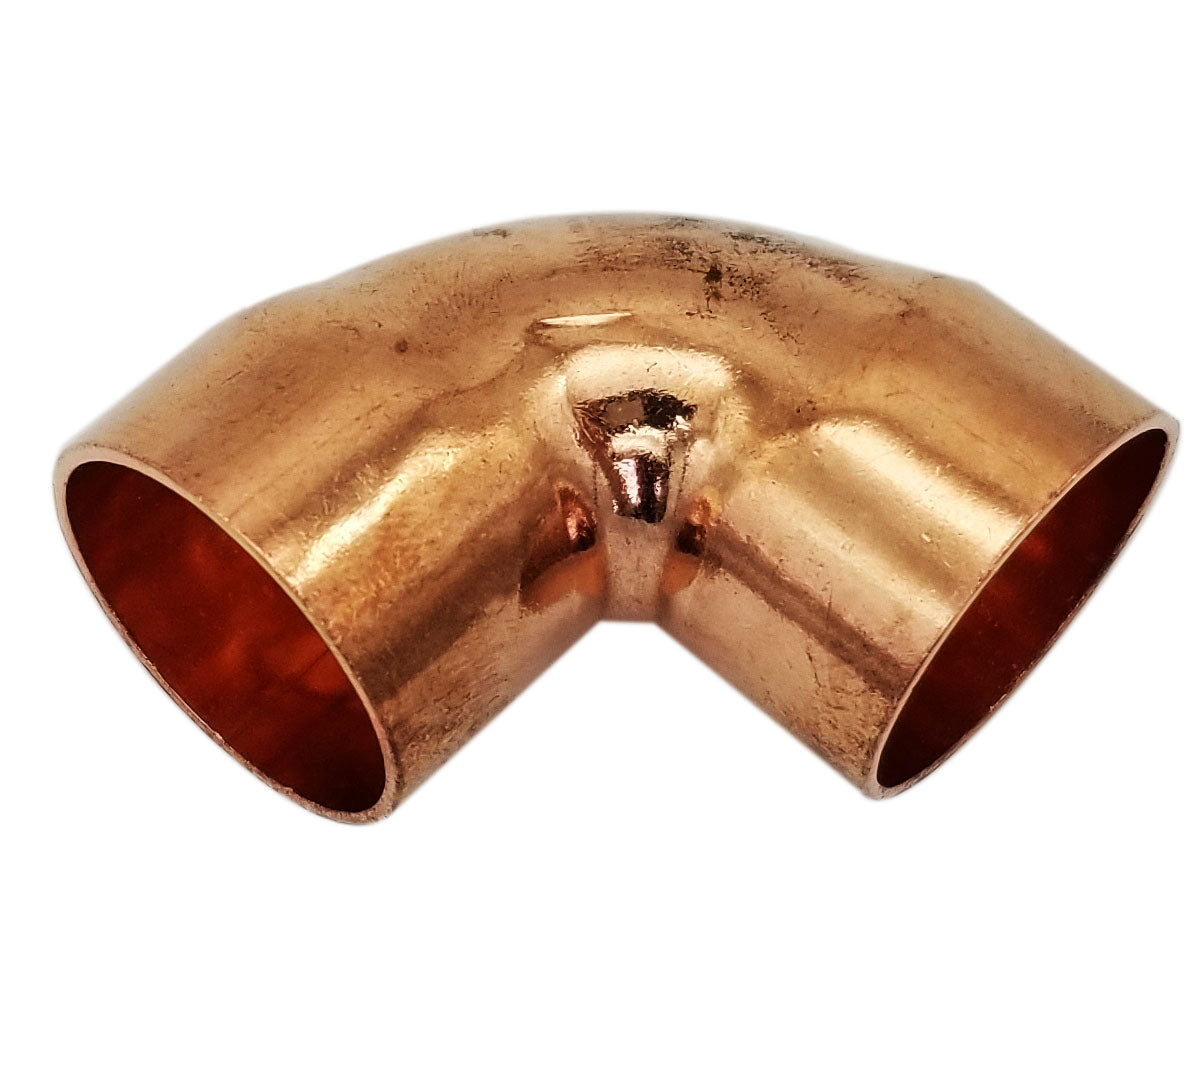 Copper Fitting 3/4 Inch (HVAC Outer Dimension) 5/8 Inch (Plumbing Inner Dimension) - 45 Degree Copper Pressure Elbow & HVAC – 99.9% Pure Copper - 10 Pack